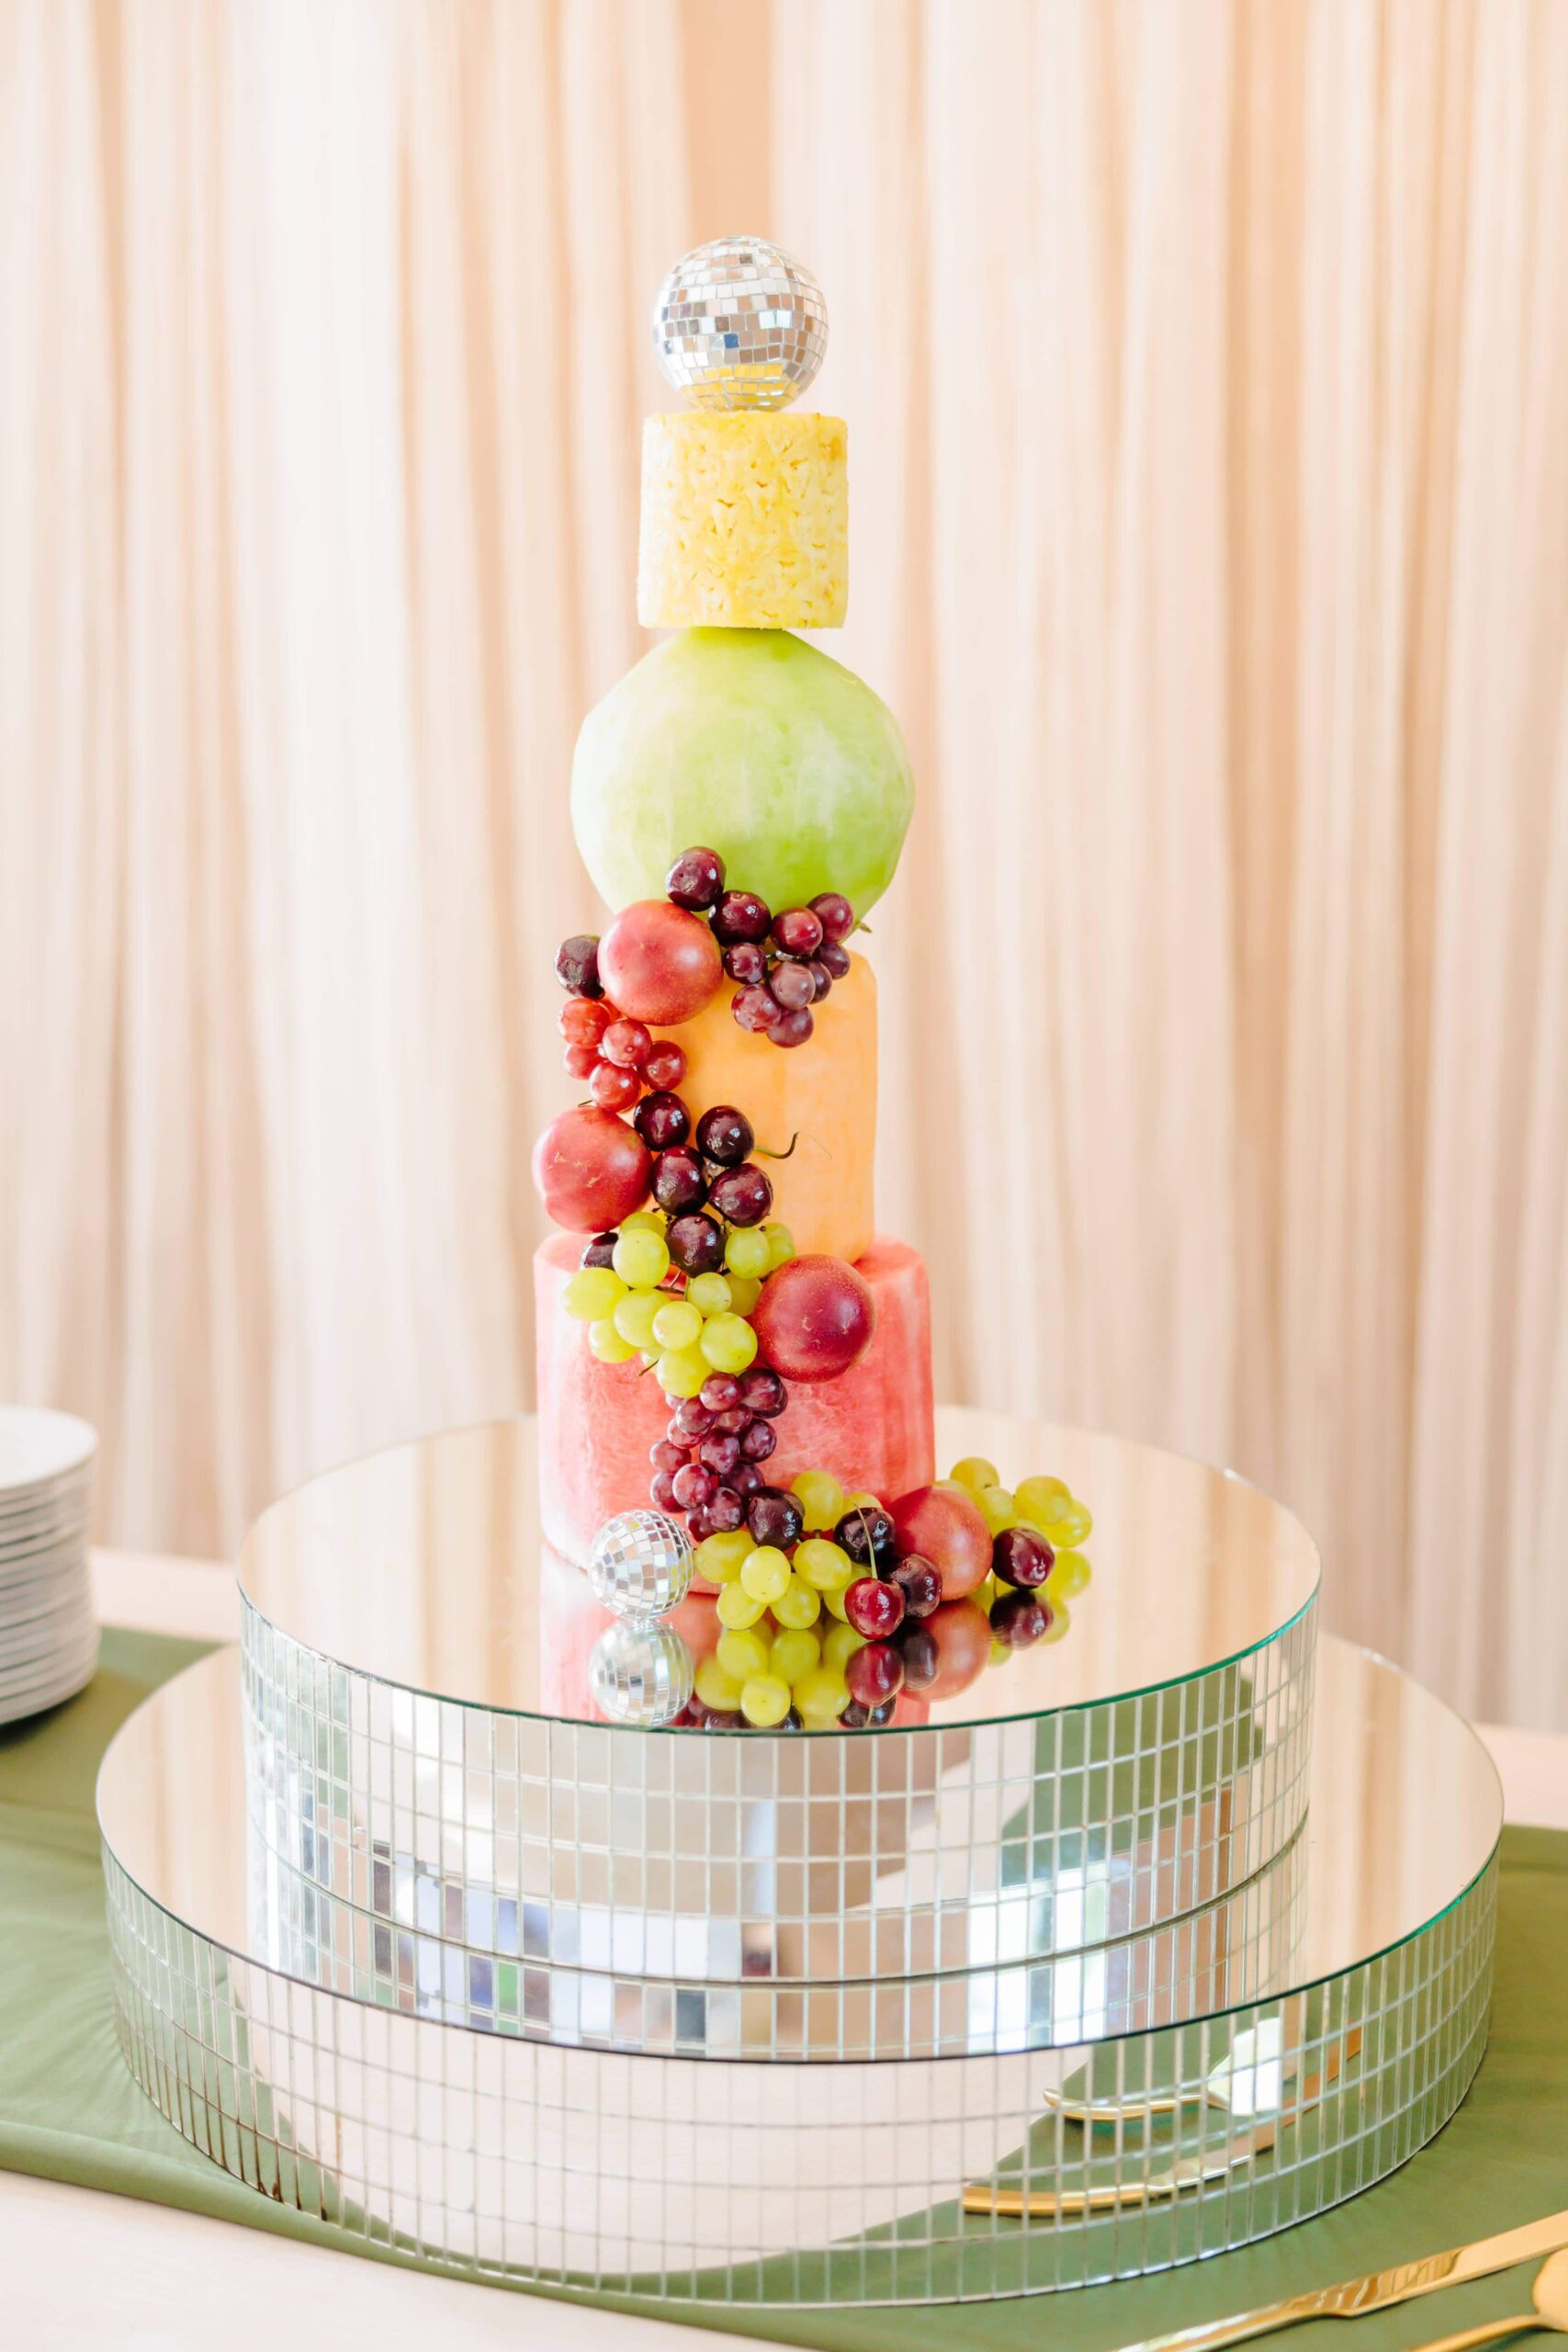 This disco wedding cake was made entirely of shaved fruit. Grapes and tiny disco balls cascade down the side of the cake.